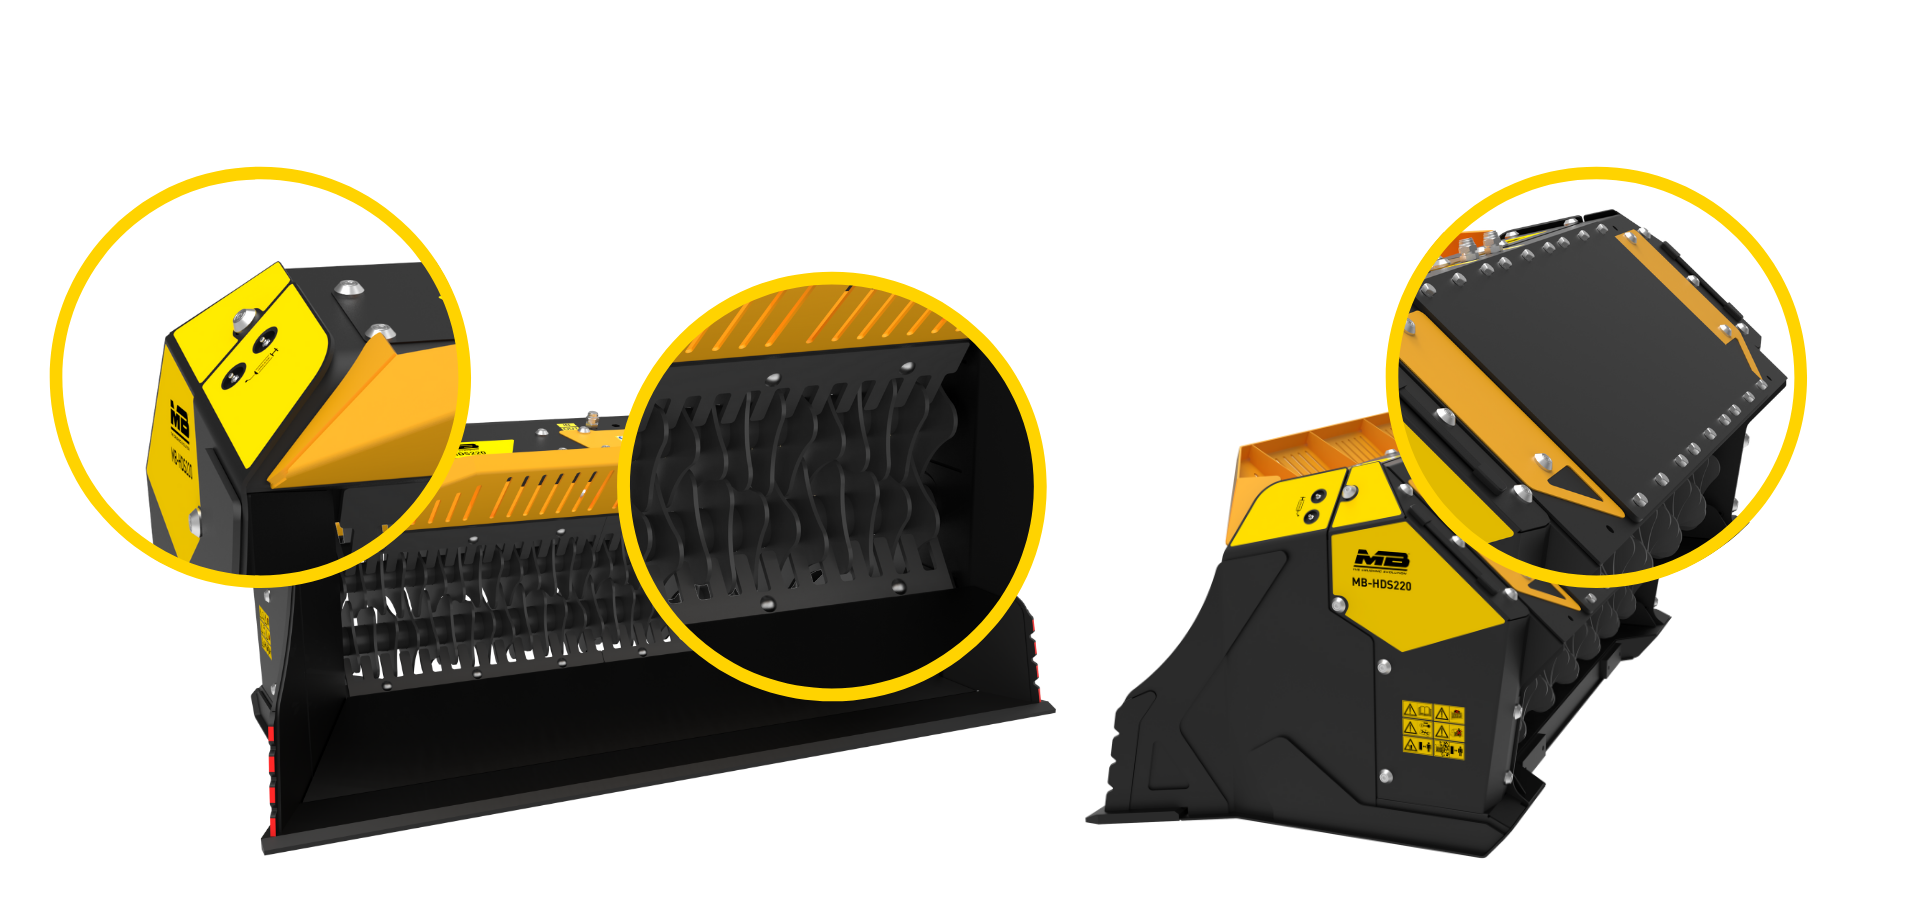 the MB-HDS220 padding  bucket fits on loaders and skid steers